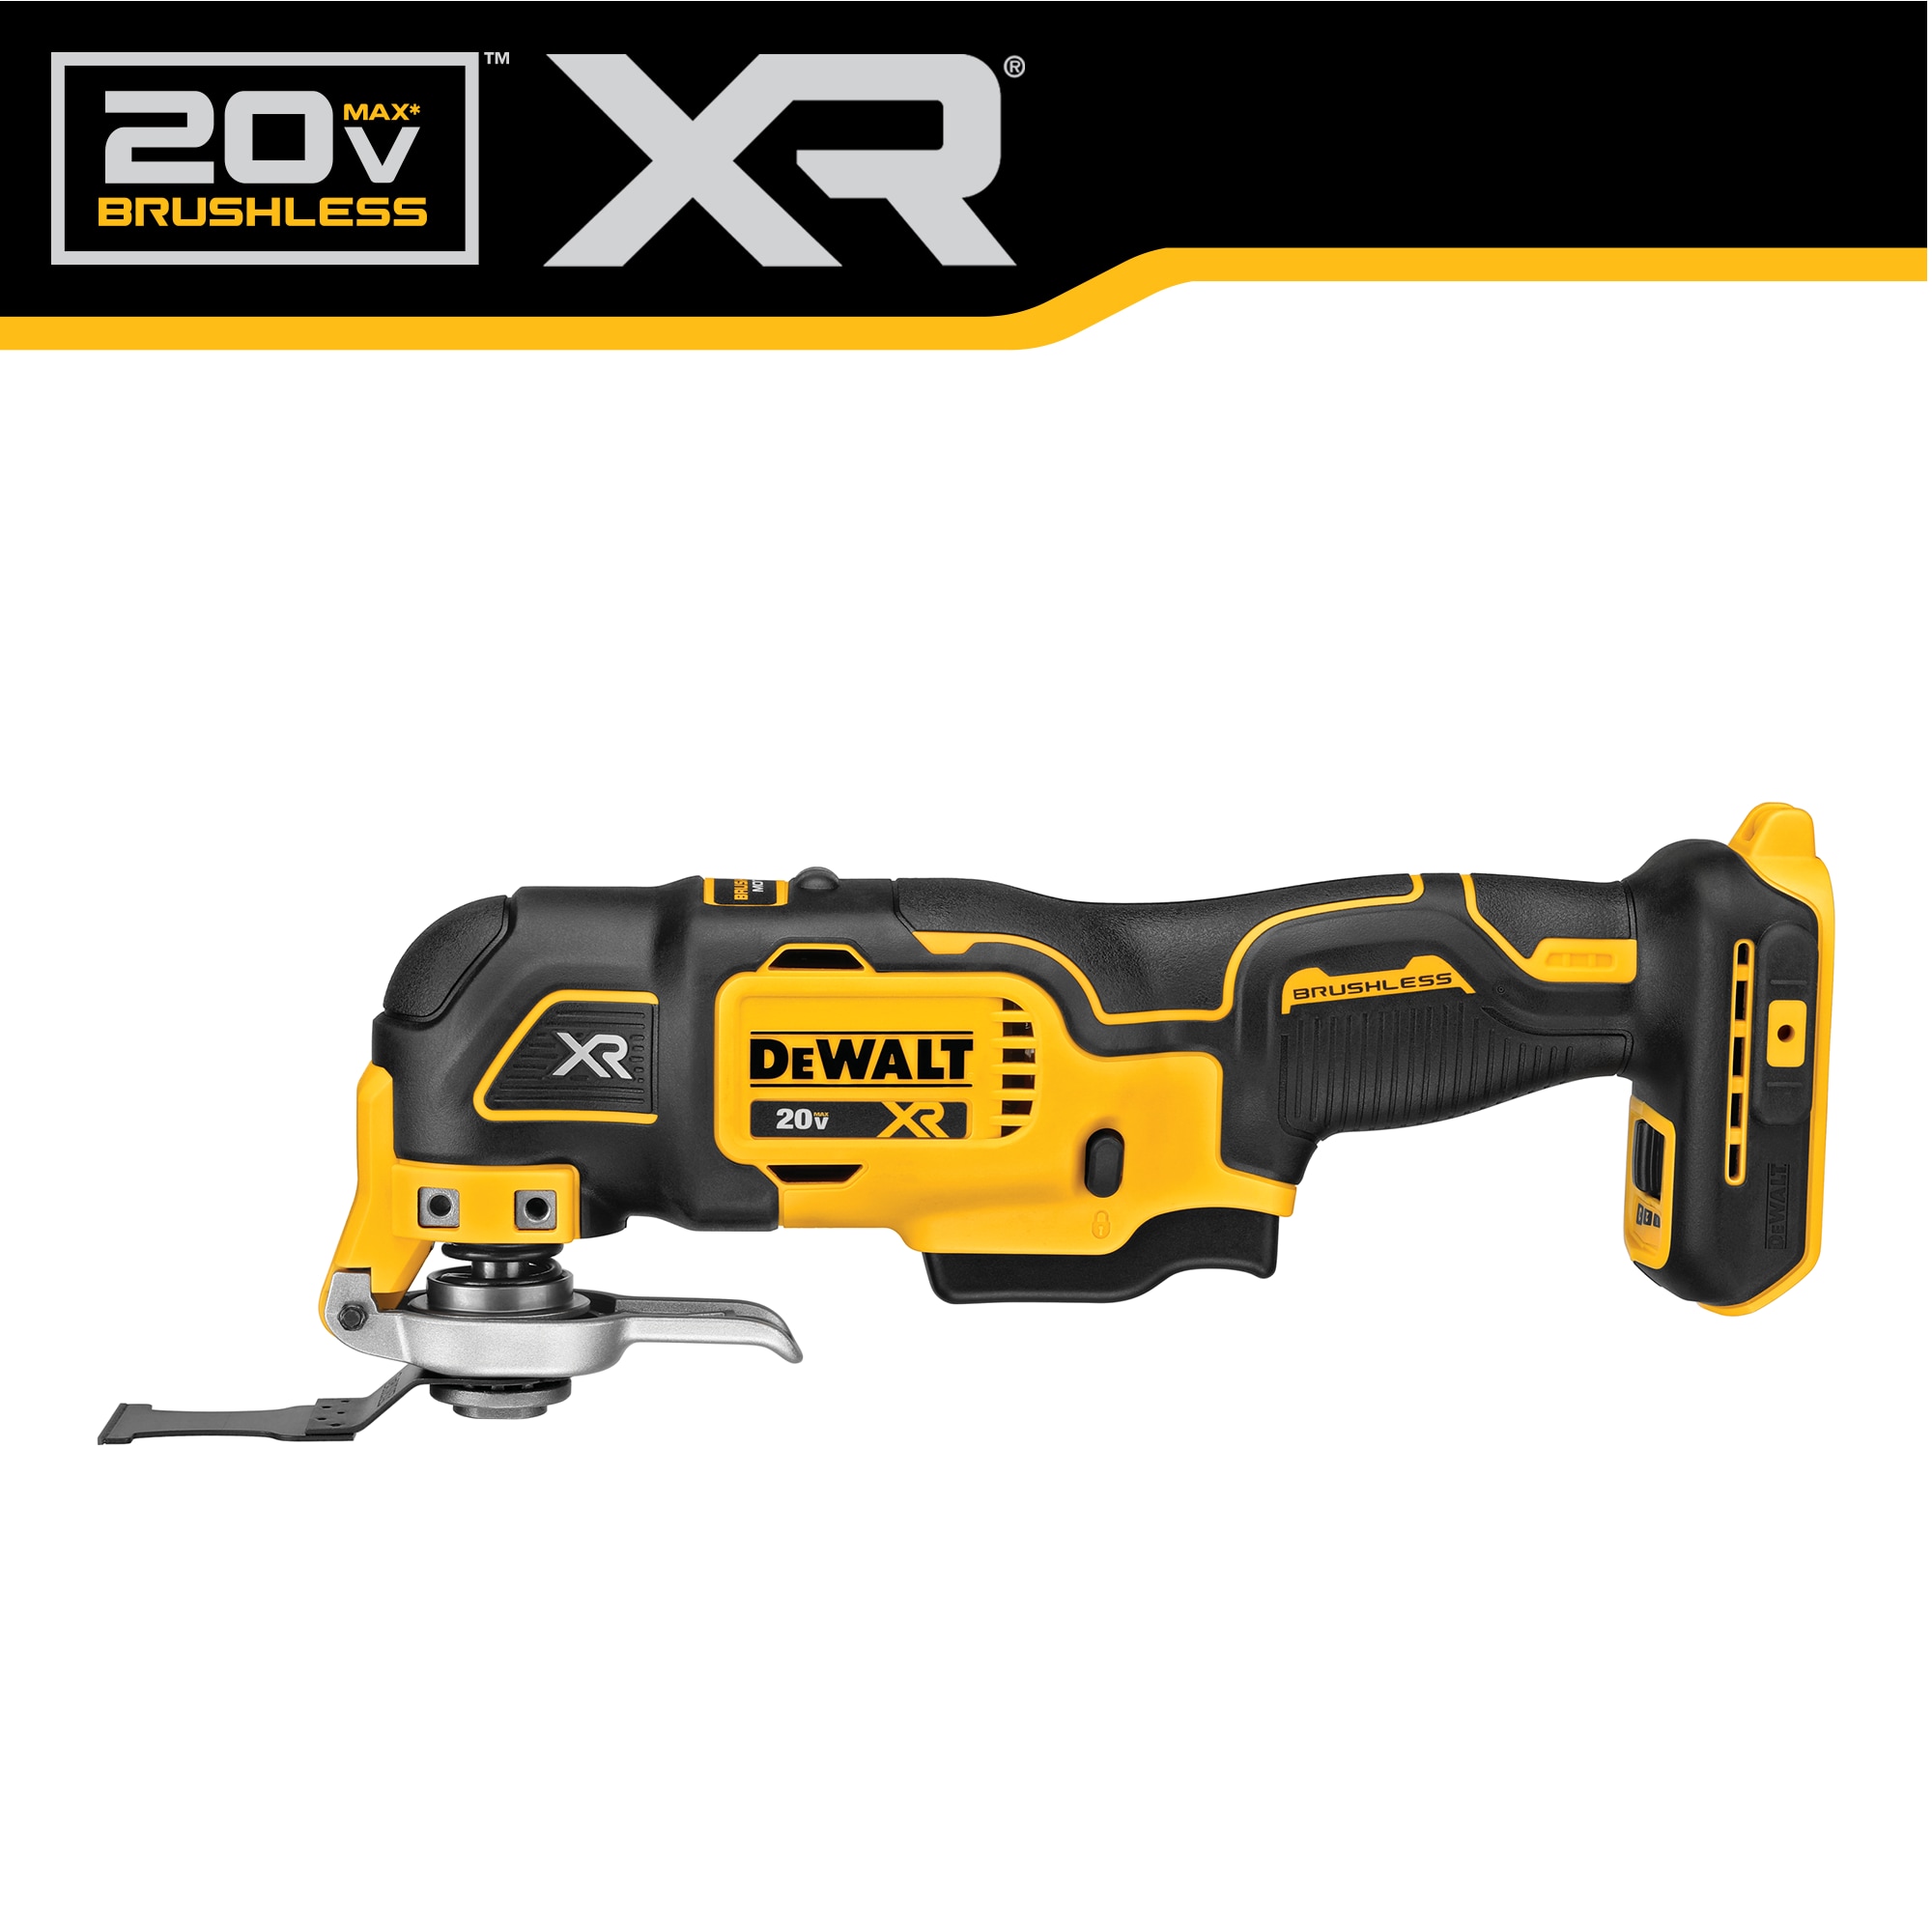 WORKSITE 20V Cordless Oscillating Multi Tool 18000OPM Saw Blades Knife  Cutting Tools Lithium Battery Power Oscillating Tools,Cordless Power Tools